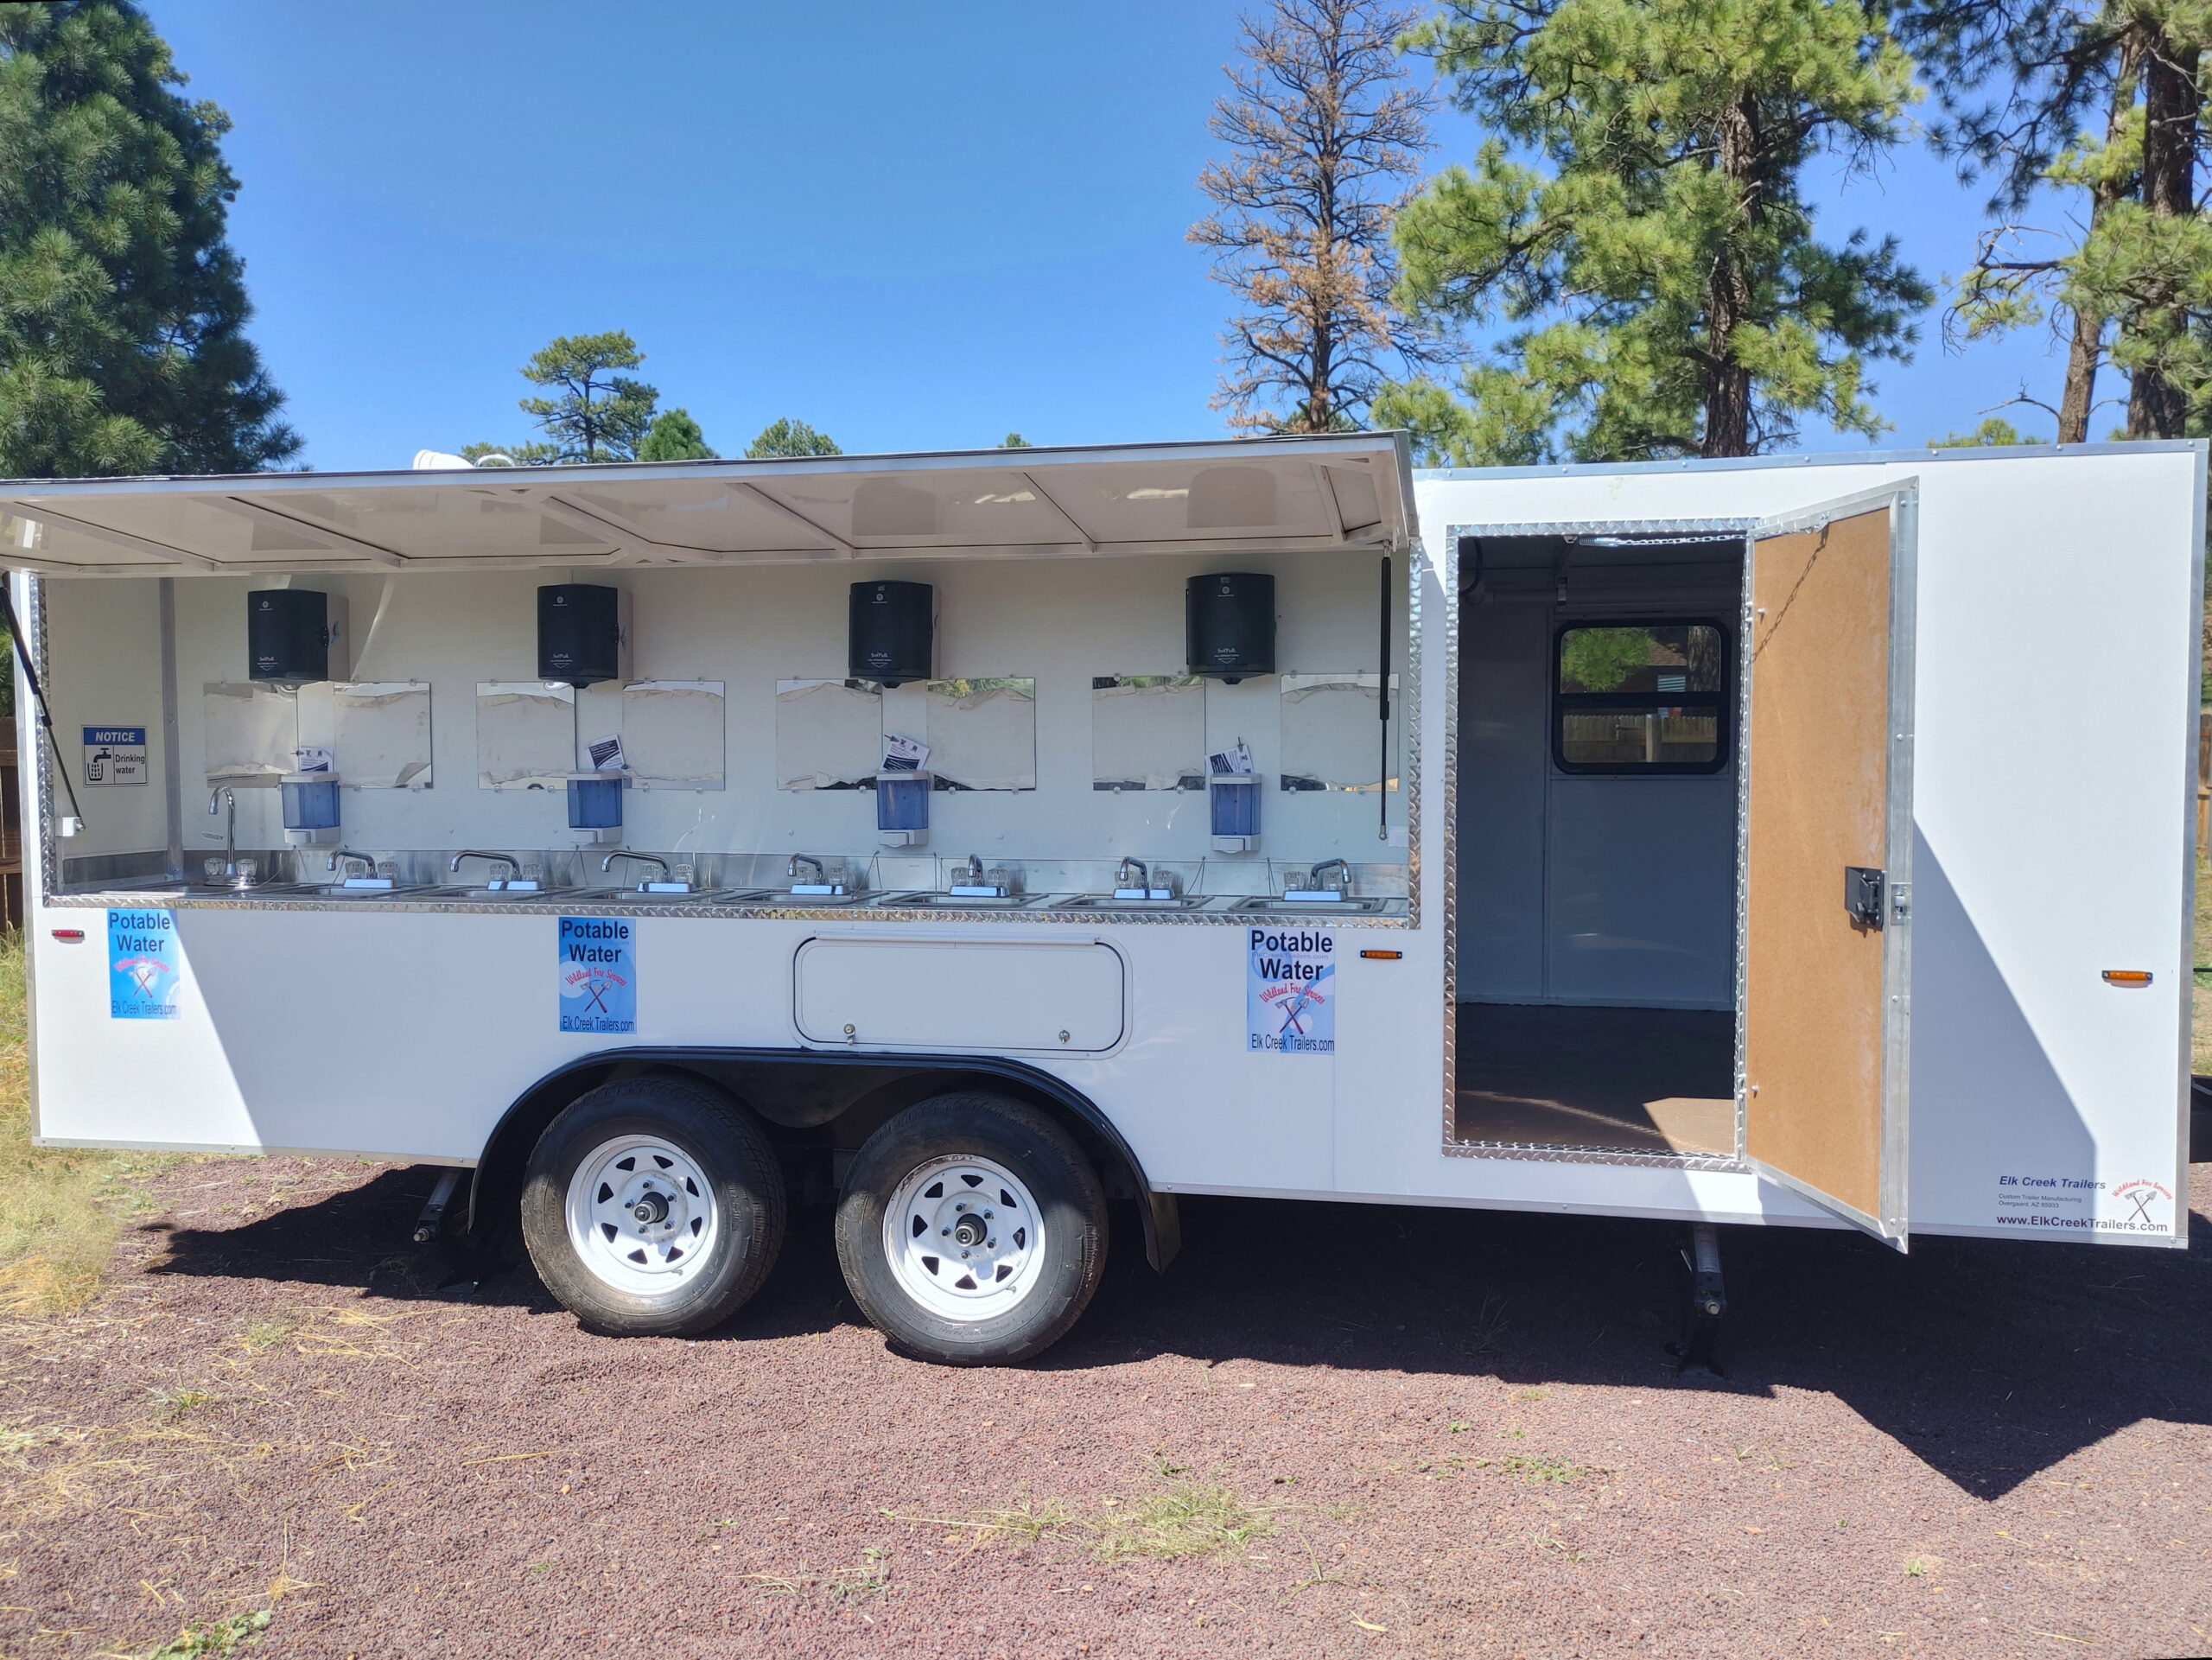 Side view of a 16 sink trailer with stainless steel sinks.